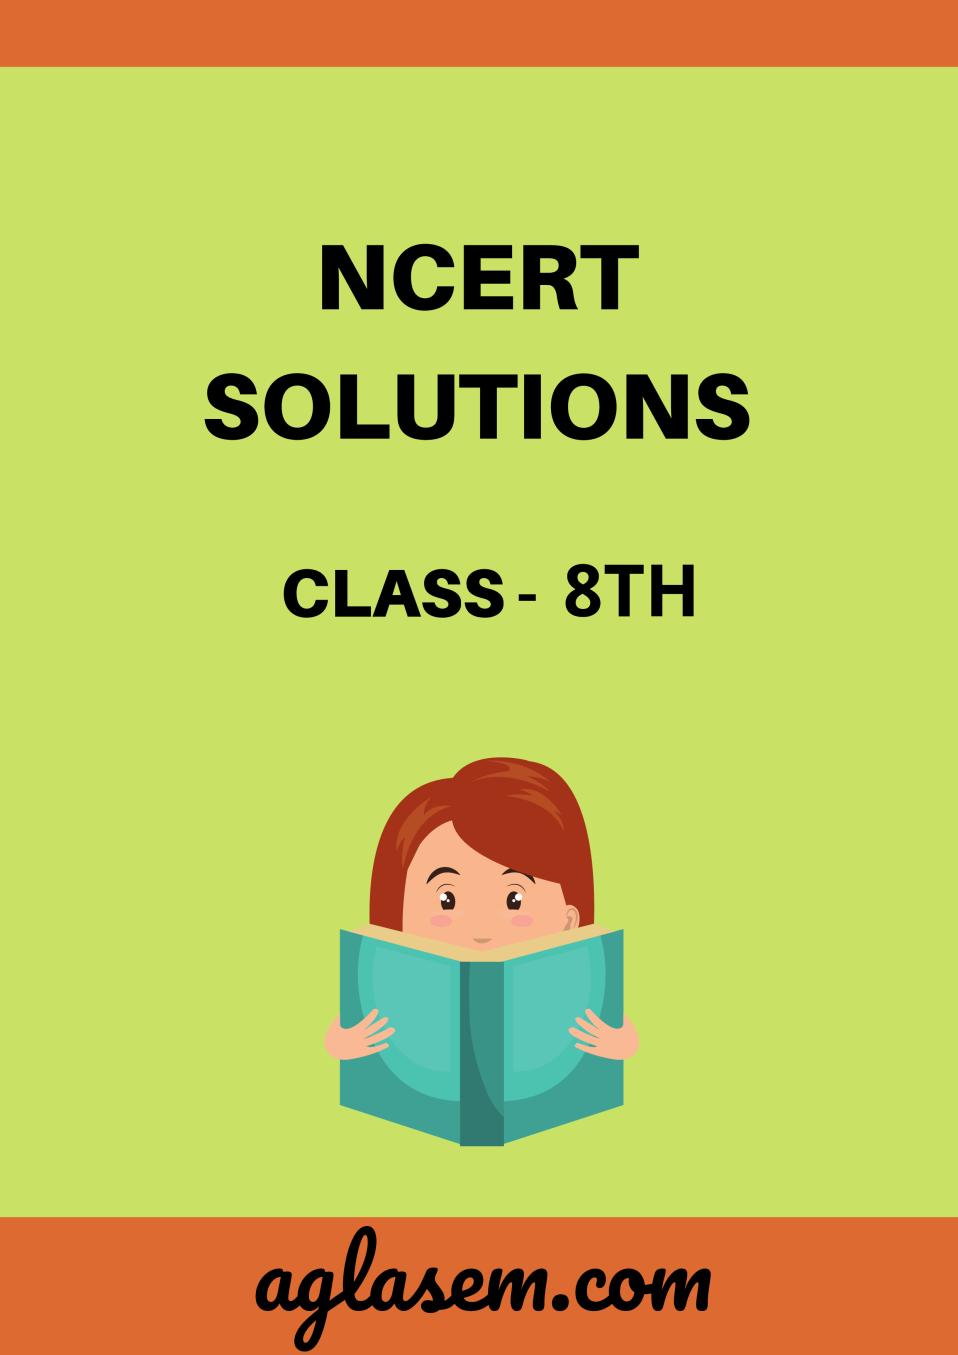 NCERT Solutions for Class 8 Social Science (नागरिक शास्त्र) Chapter 4 कानूनों के समझ - Page 1